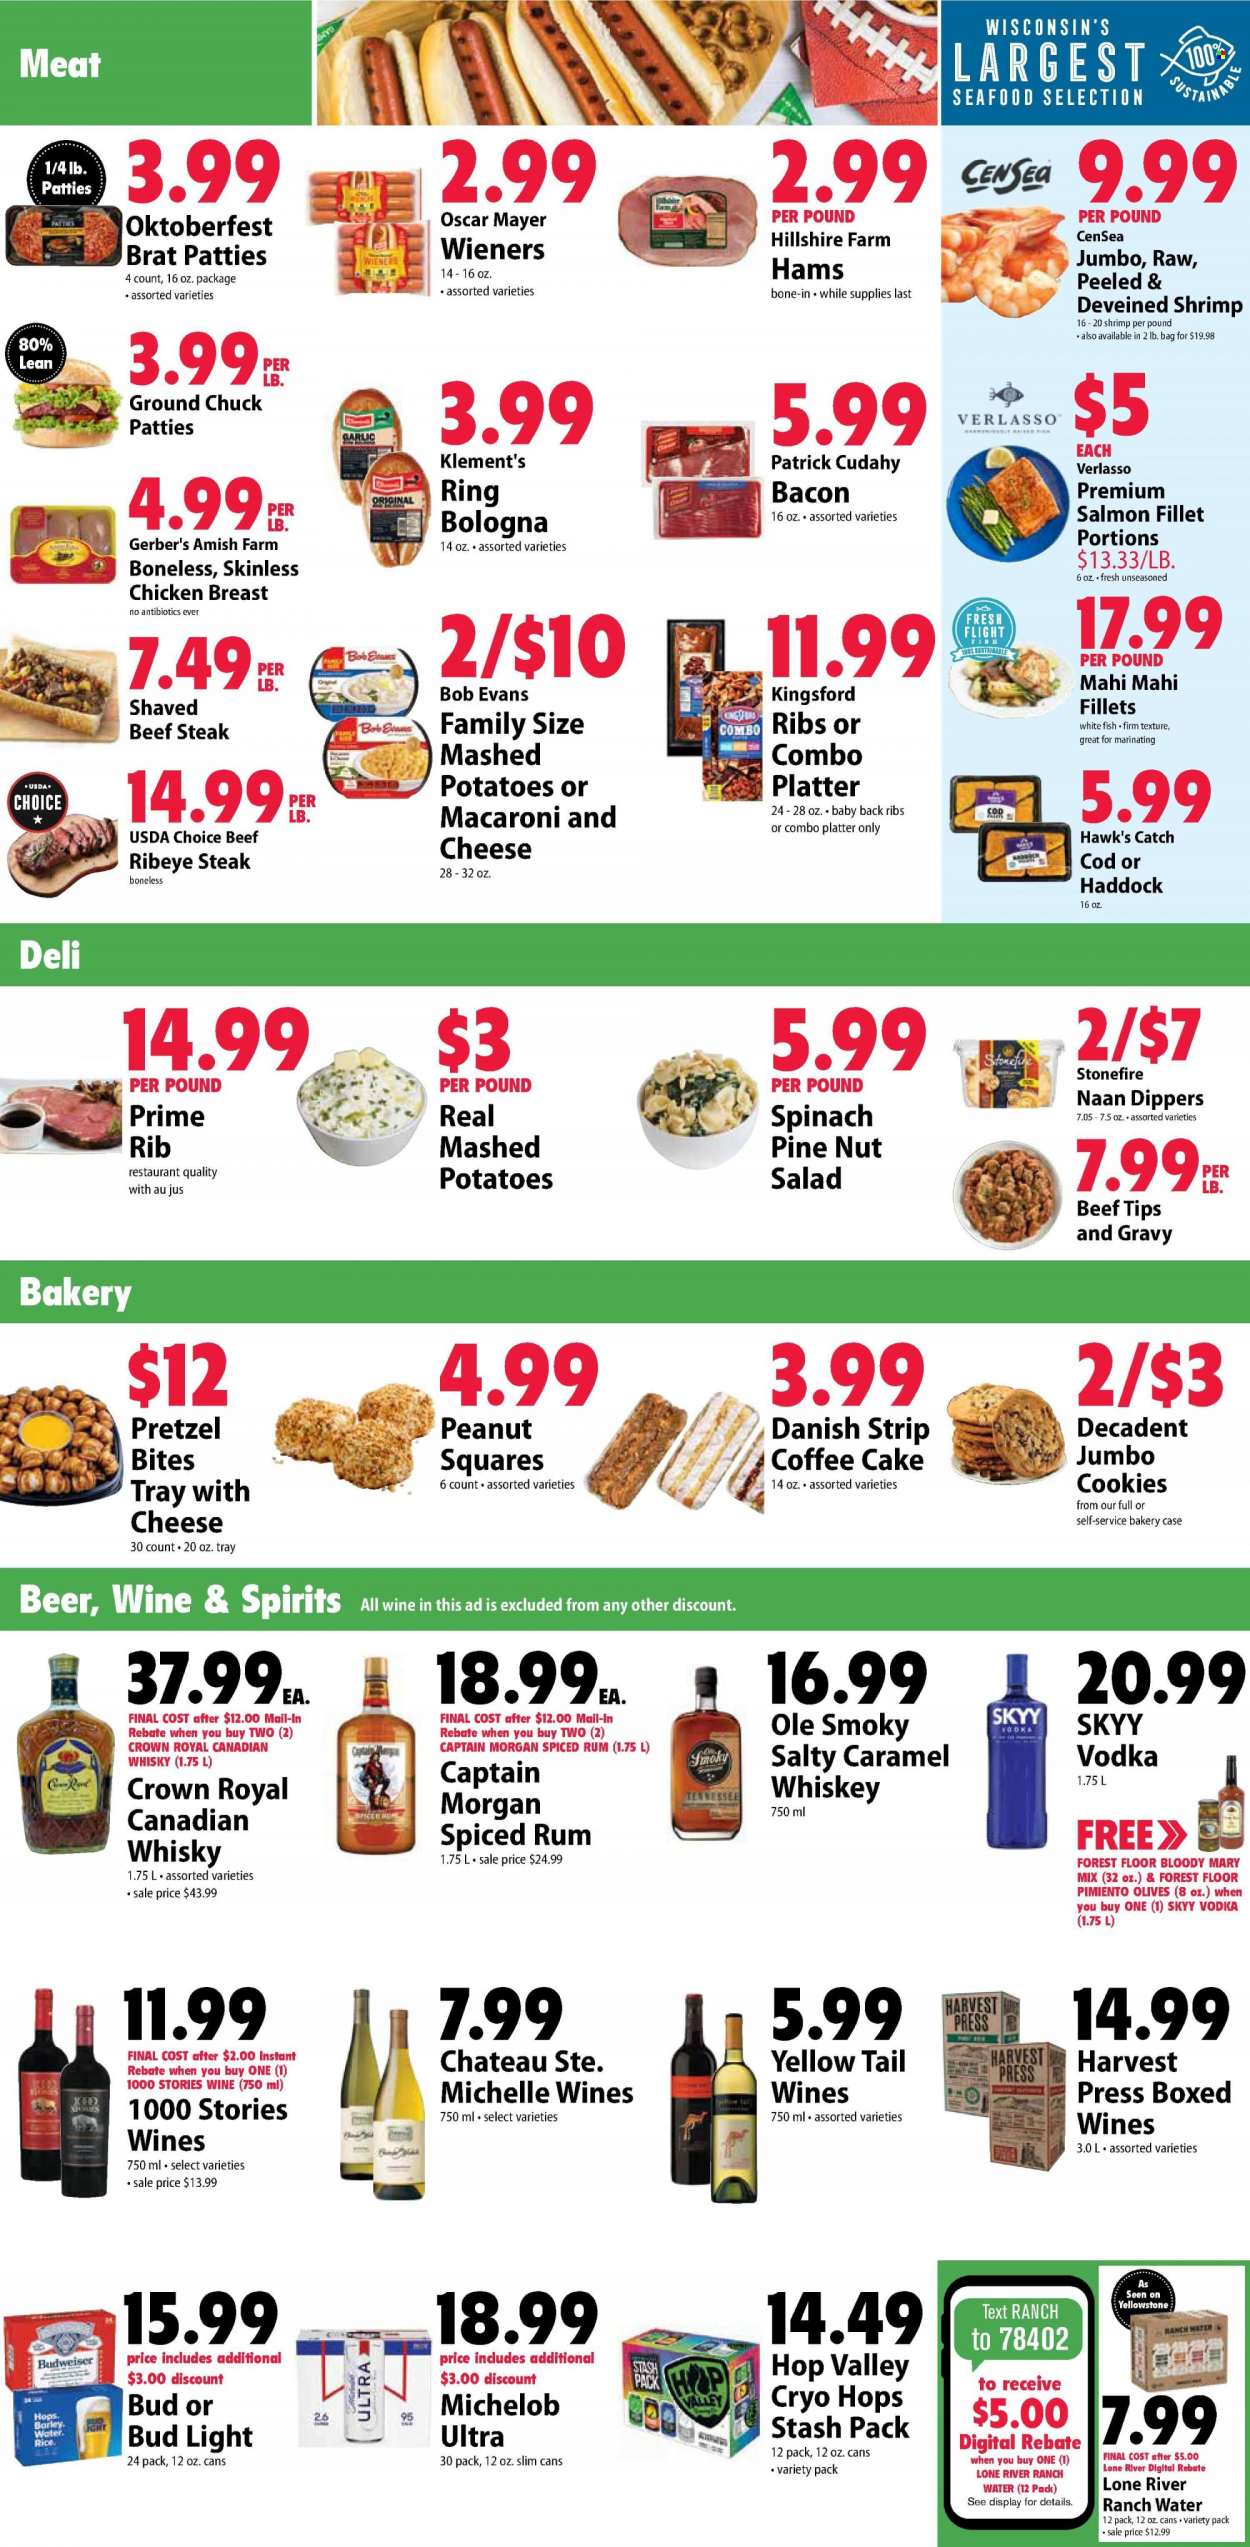 thumbnail - Festival Foods Flyer - 01/19/2022 - 01/25/2022 - Sales products - pretzels, cake, coffee cake, garlic, salad, cod, mahi mahi, salmon, salmon fillet, whitefish, haddock, seafood, fish, shrimps, macaroni & cheese, mashed potatoes, Bob Evans, Hillshire Farm, bologna sausage, Oscar Mayer, cookies, olives, canadian whisky, Captain Morgan, rum, spiced rum, vodka, whiskey, SKYY, whisky, beer, Bud Light, chicken breasts, beef meat, beef steak, ground chuck, steak, ribeye steak, pork meat, pork ribs, pork back ribs, Budweiser, Michelob. Page 2.